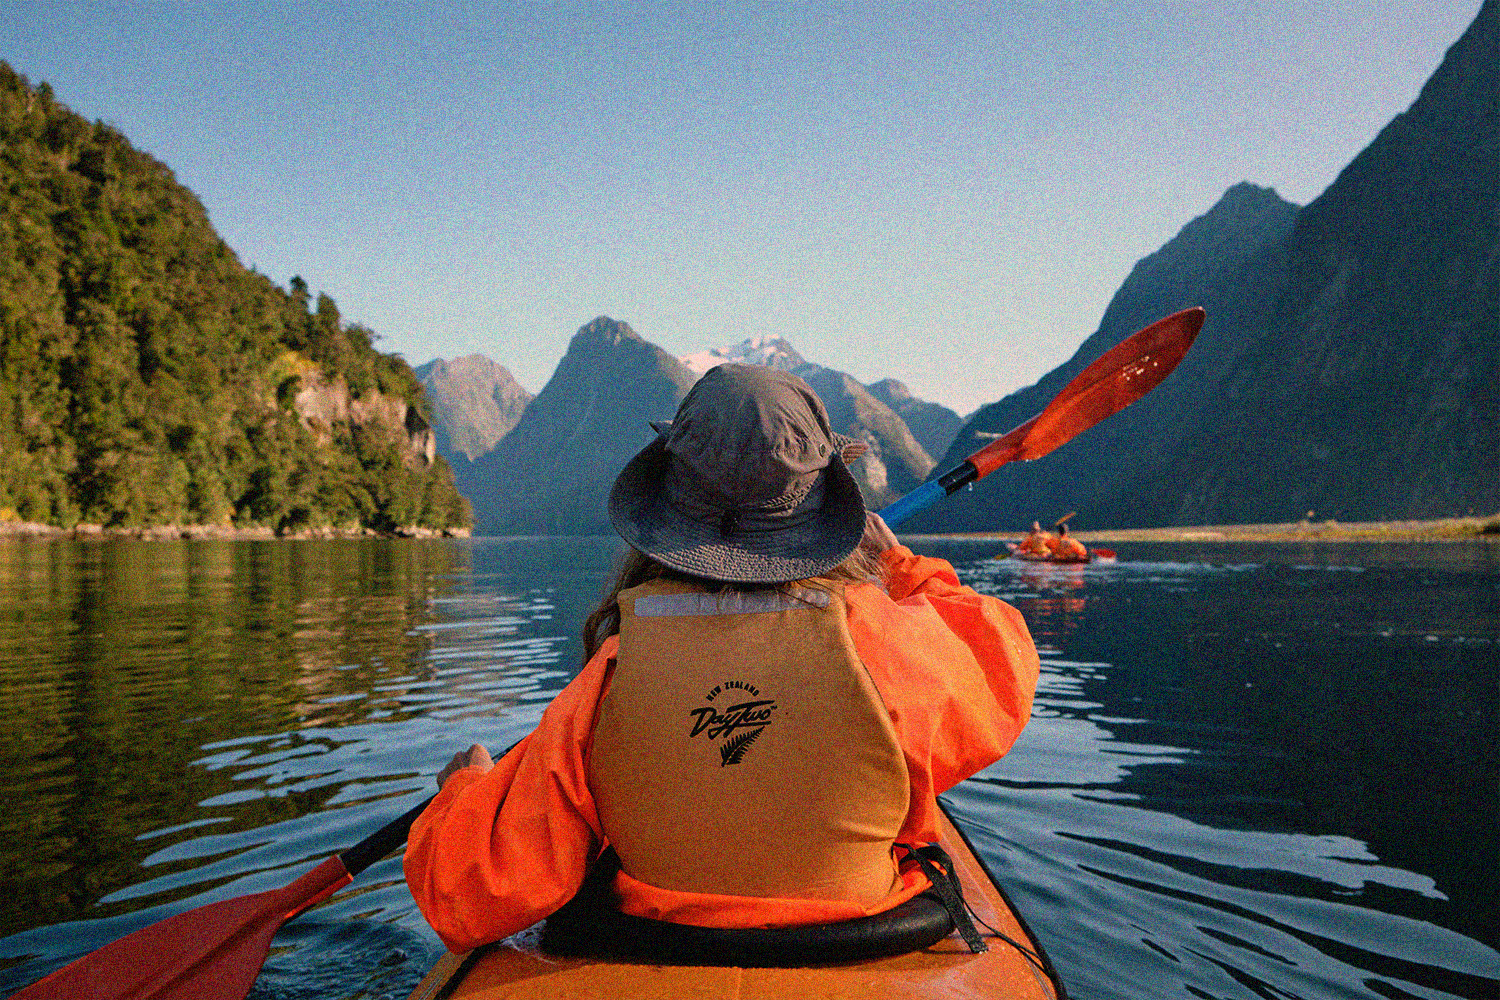 "Kayaking in the Milford Sound today #NewZealand"